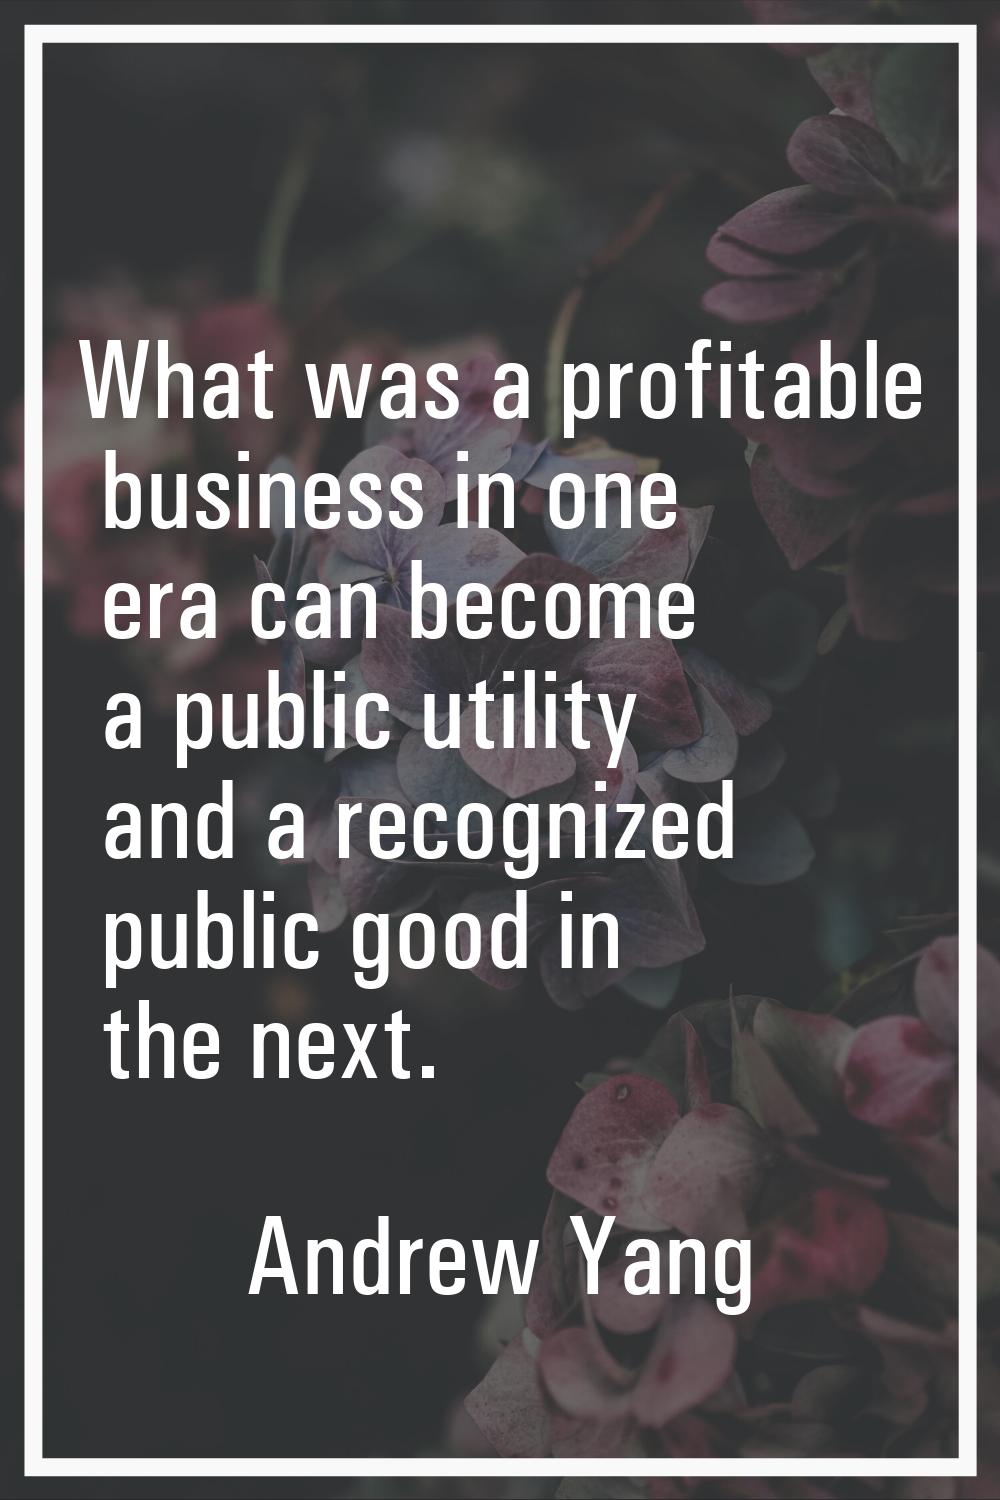 What was a profitable business in one era can become a public utility and a recognized public good 